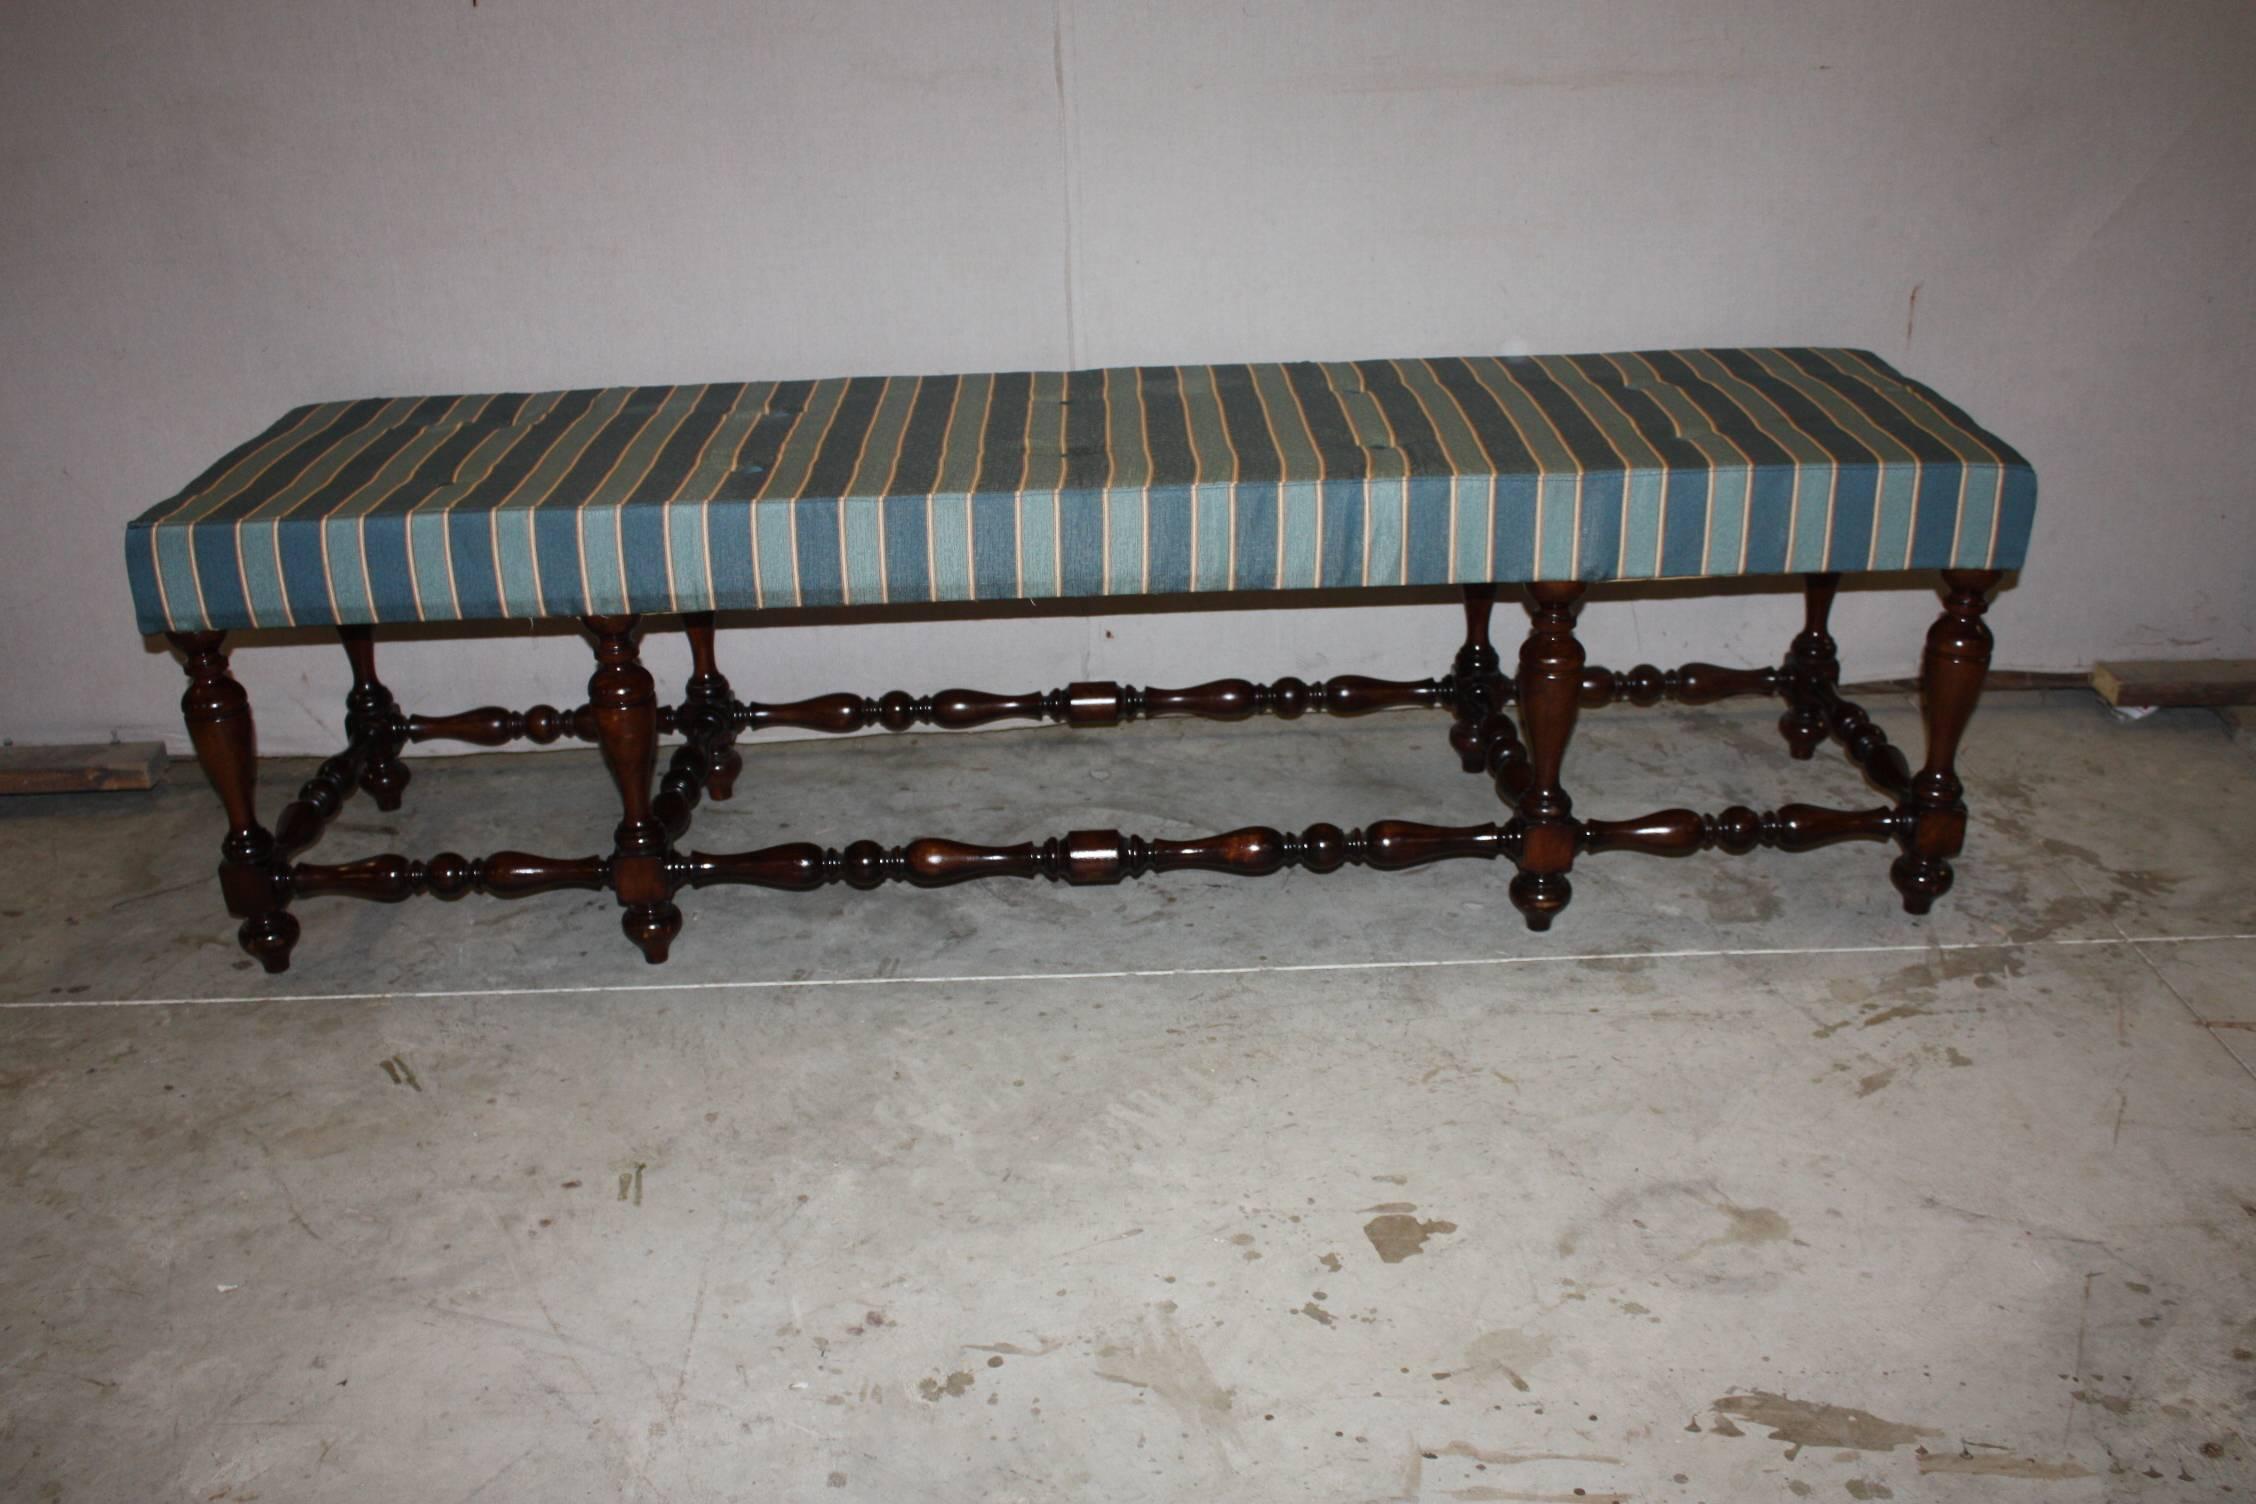 This is a very good looking long Italian bench. The upholstery is usable but the bench could easily be recovered.